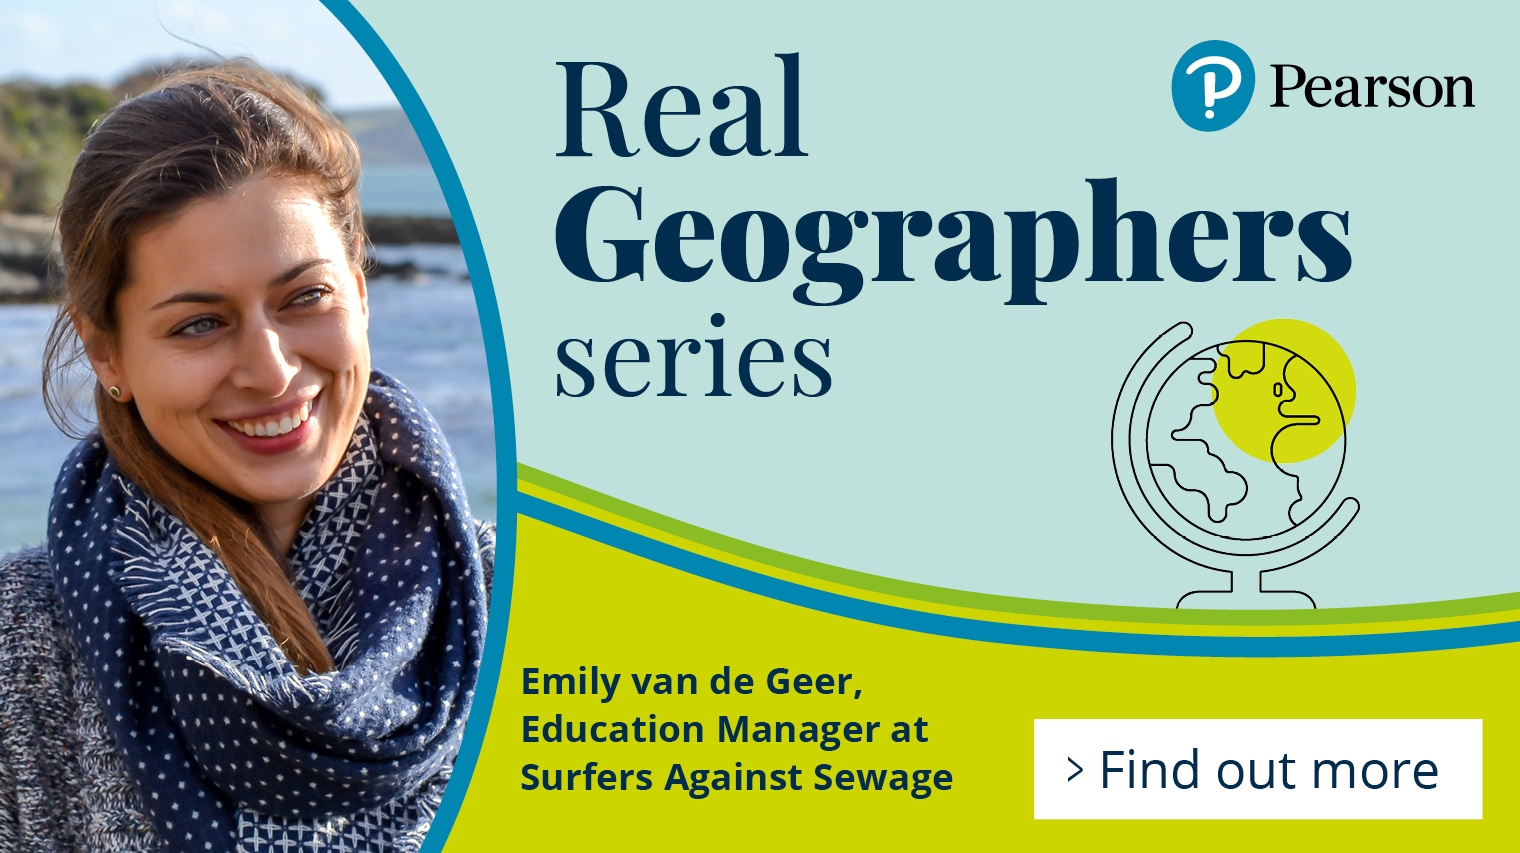 Emily van de Geer, Education Manager at Surfers Against Sewage. Find out more